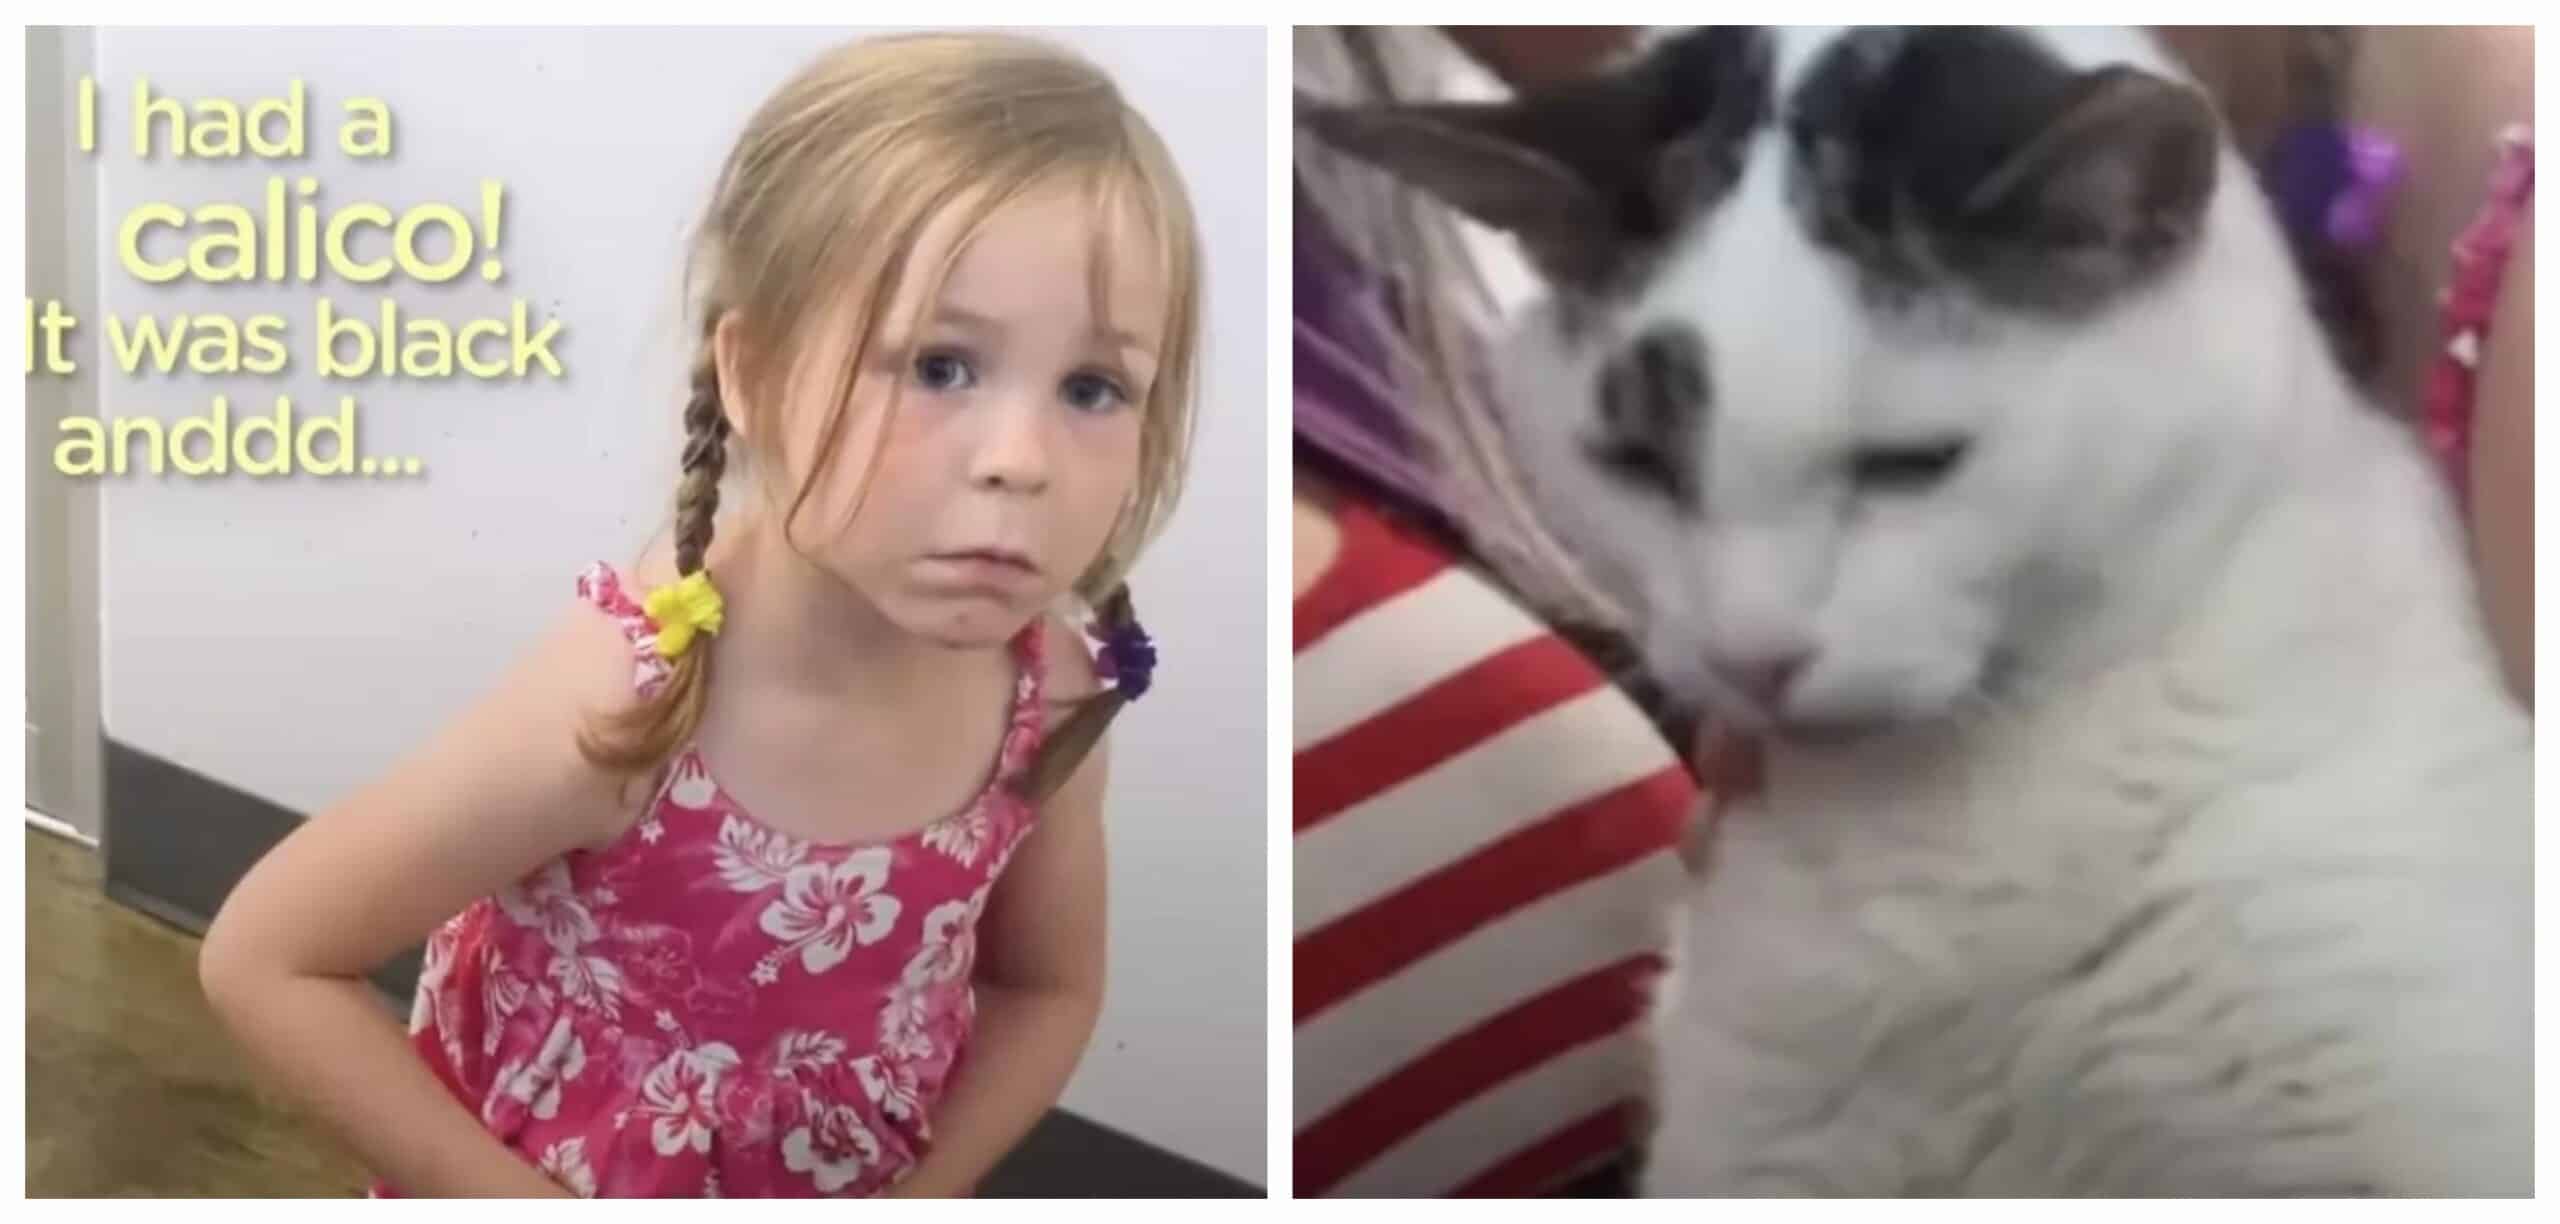 After three years away a young girl reunites with her beloved cat